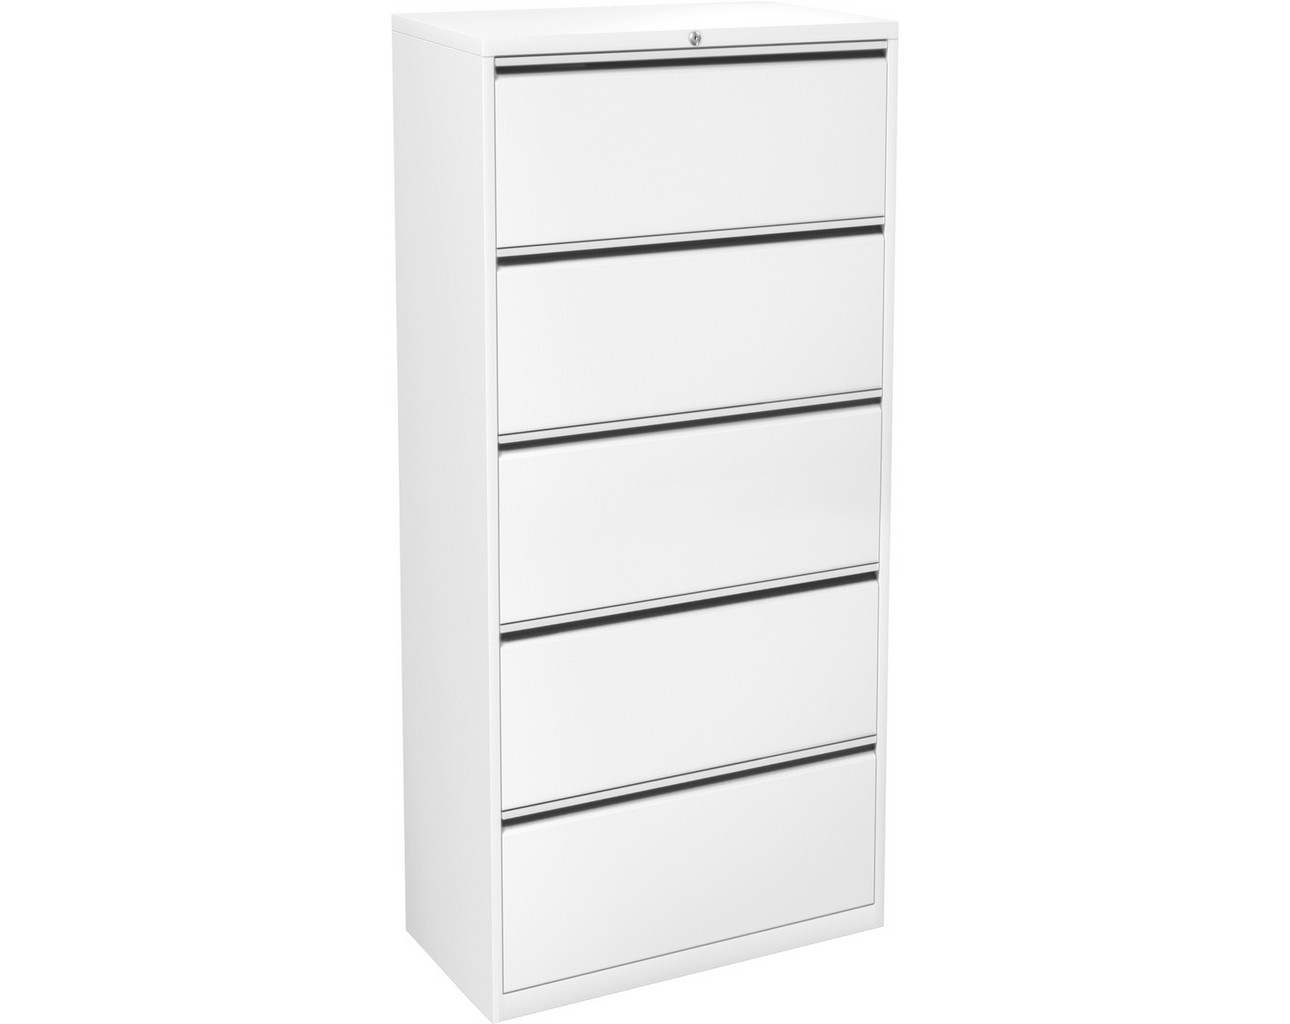 Steelwise Lateral Filing Cabinet – 5 Drawer in White